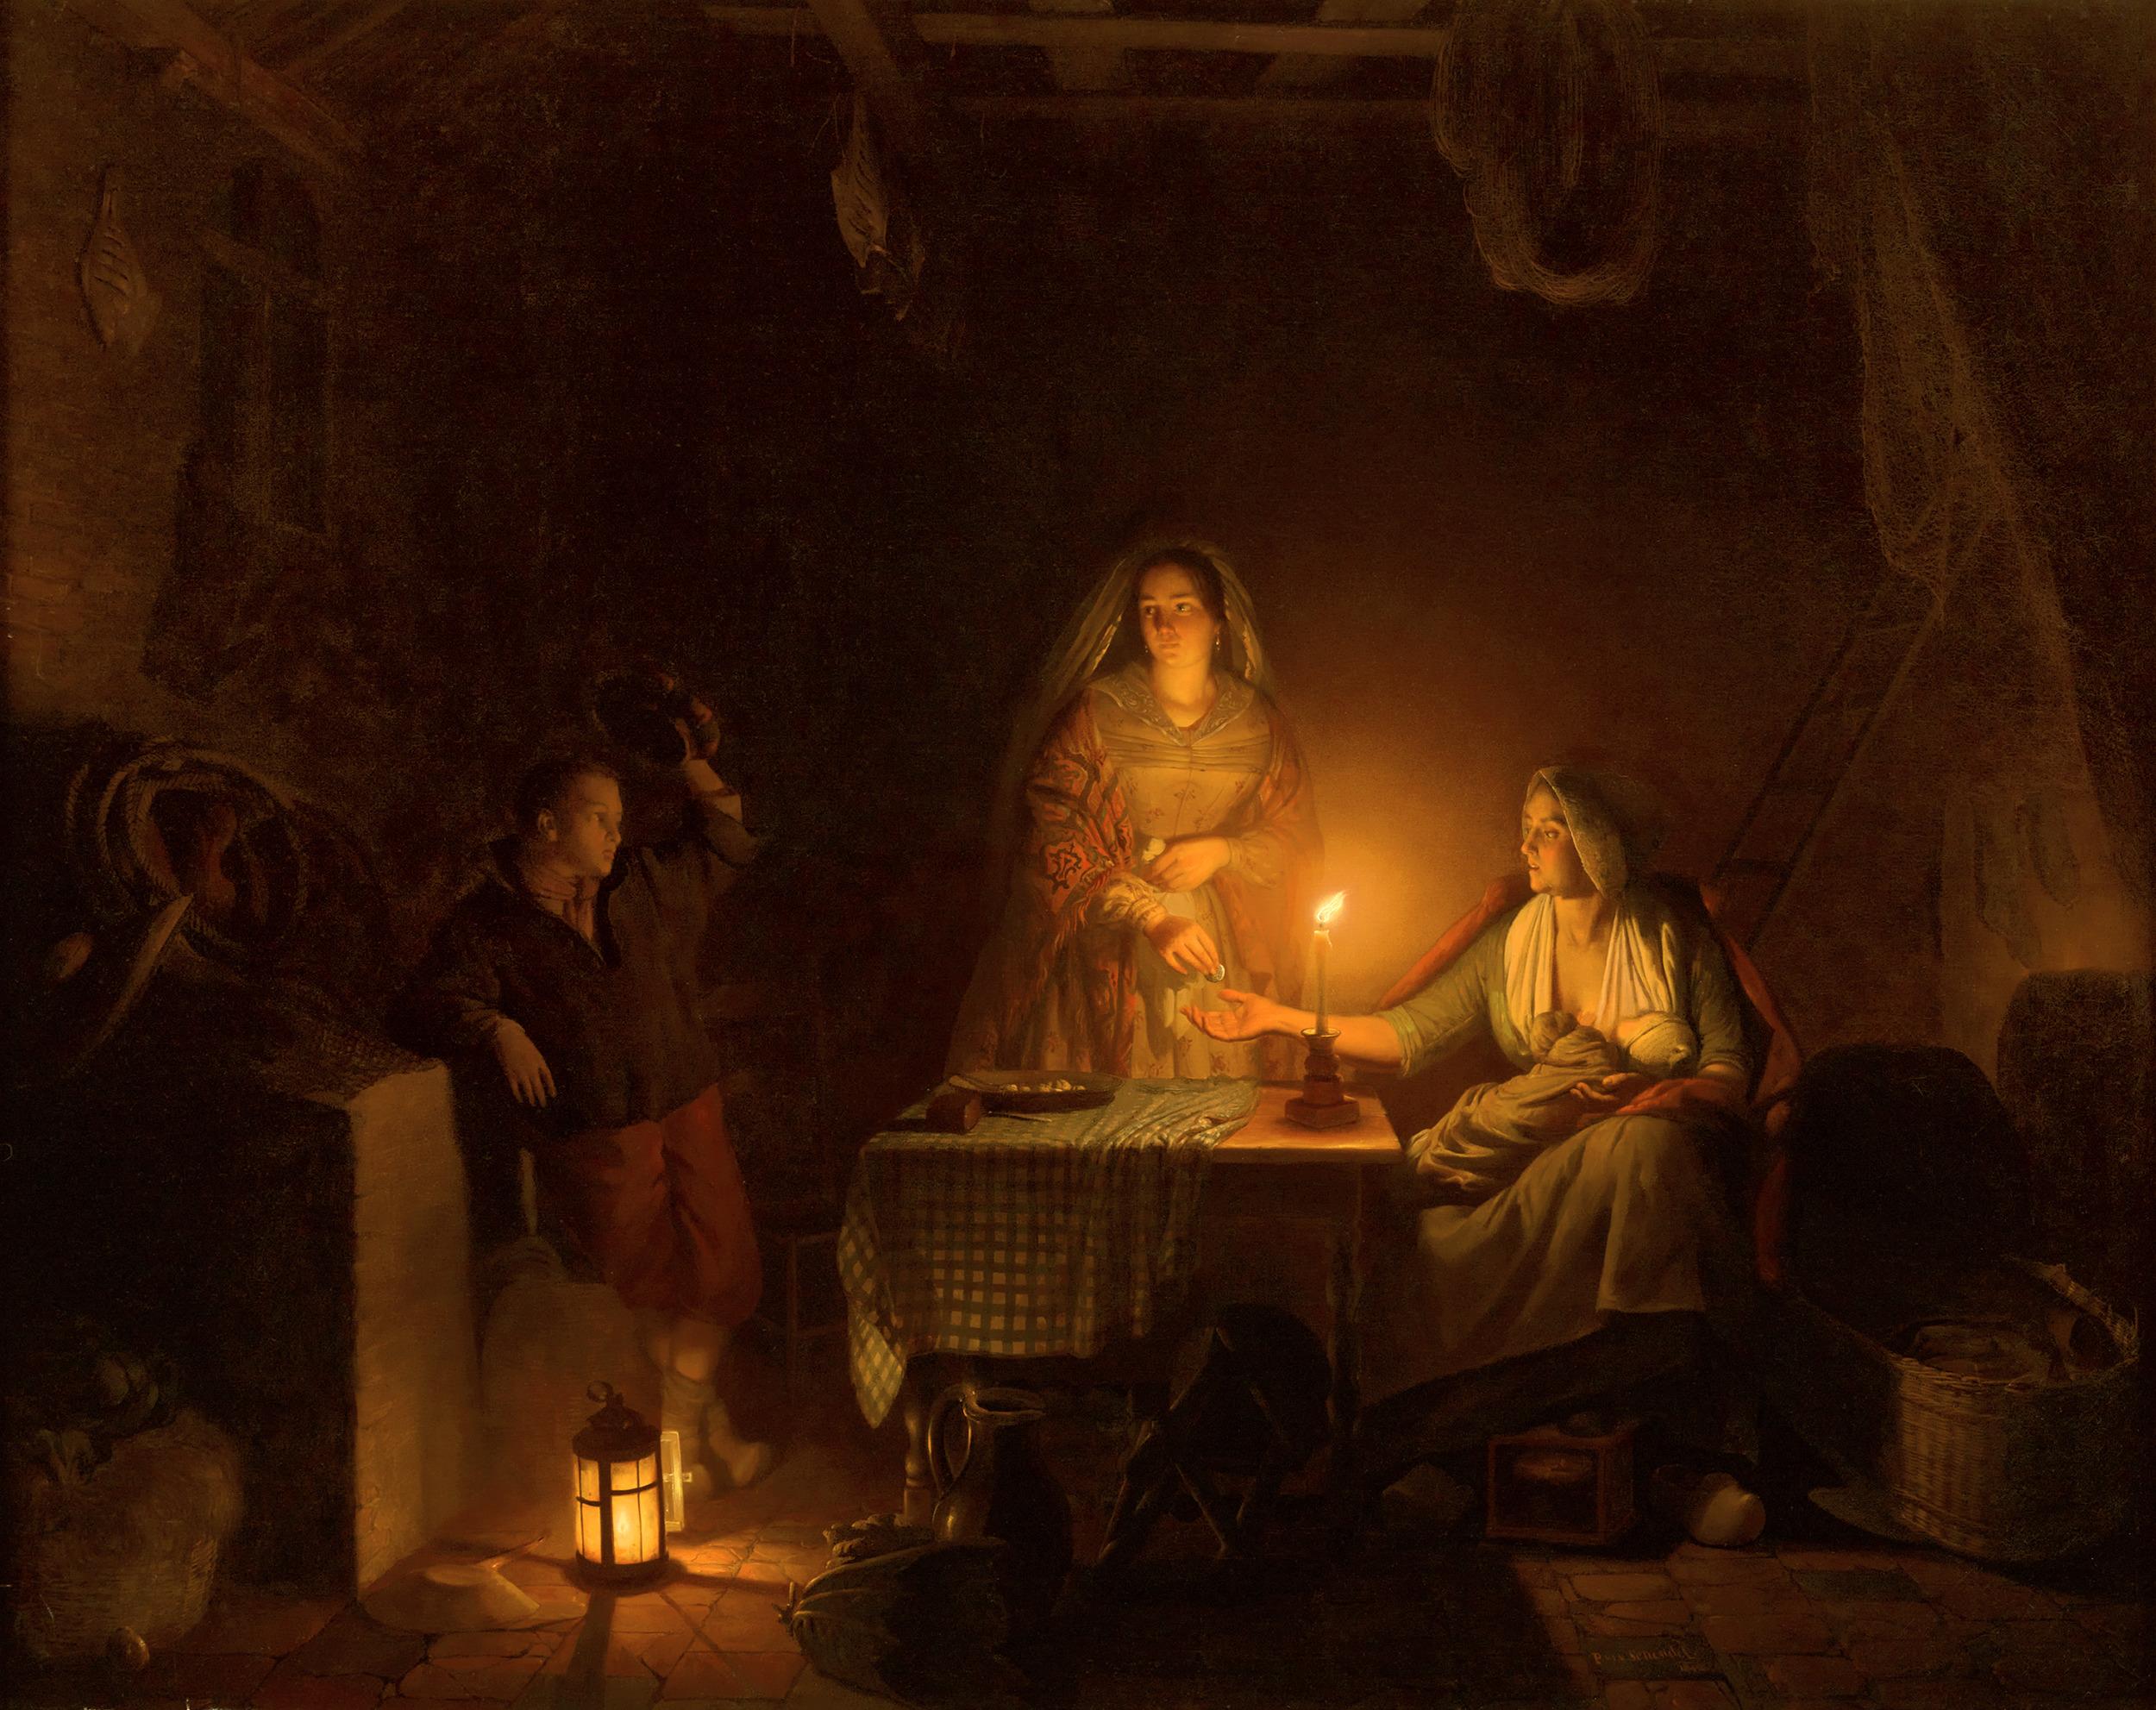 Petrus van Schendel
1806-1870  Belgian 

By Candlelight 

Signed and dated “P.van Schendel / 1842” (lower right)
Oil on canvas 

This dynamic painting by Petrus van Schendel showcases the artist's signature mastery of chiaroscuro in his evocative